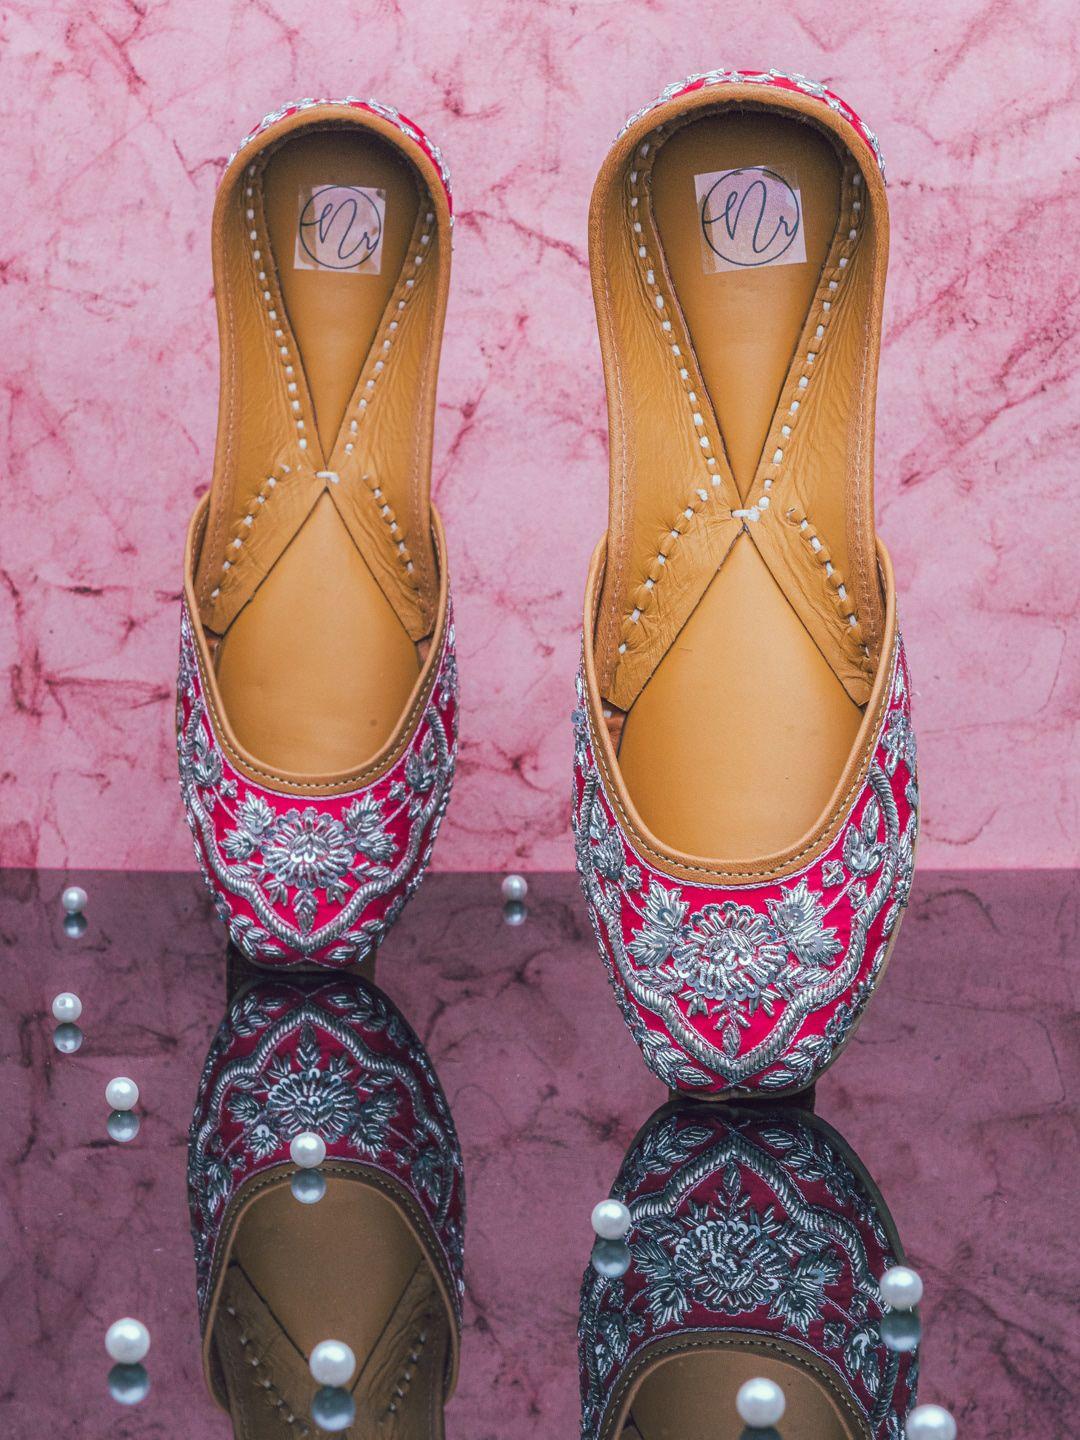 NR By Nidhi Rathi Women Pink Hand Embroidered Mojaris Flats